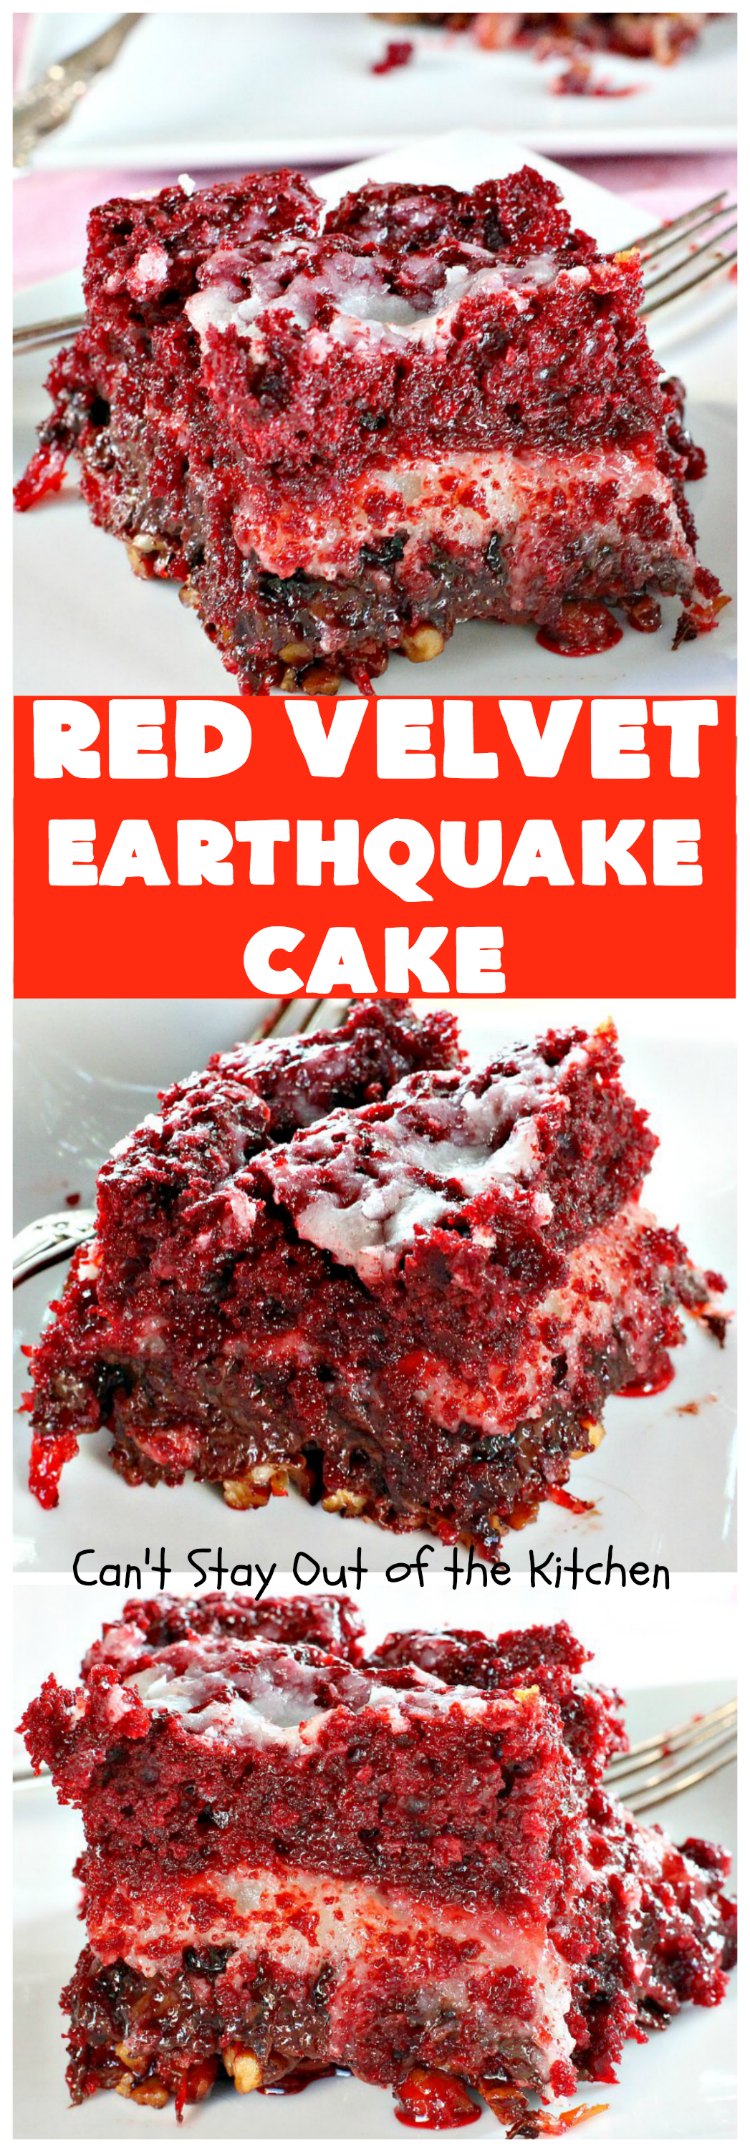 Red Velvet Earthquake Cake | Can't Stay Out of the Kitchen